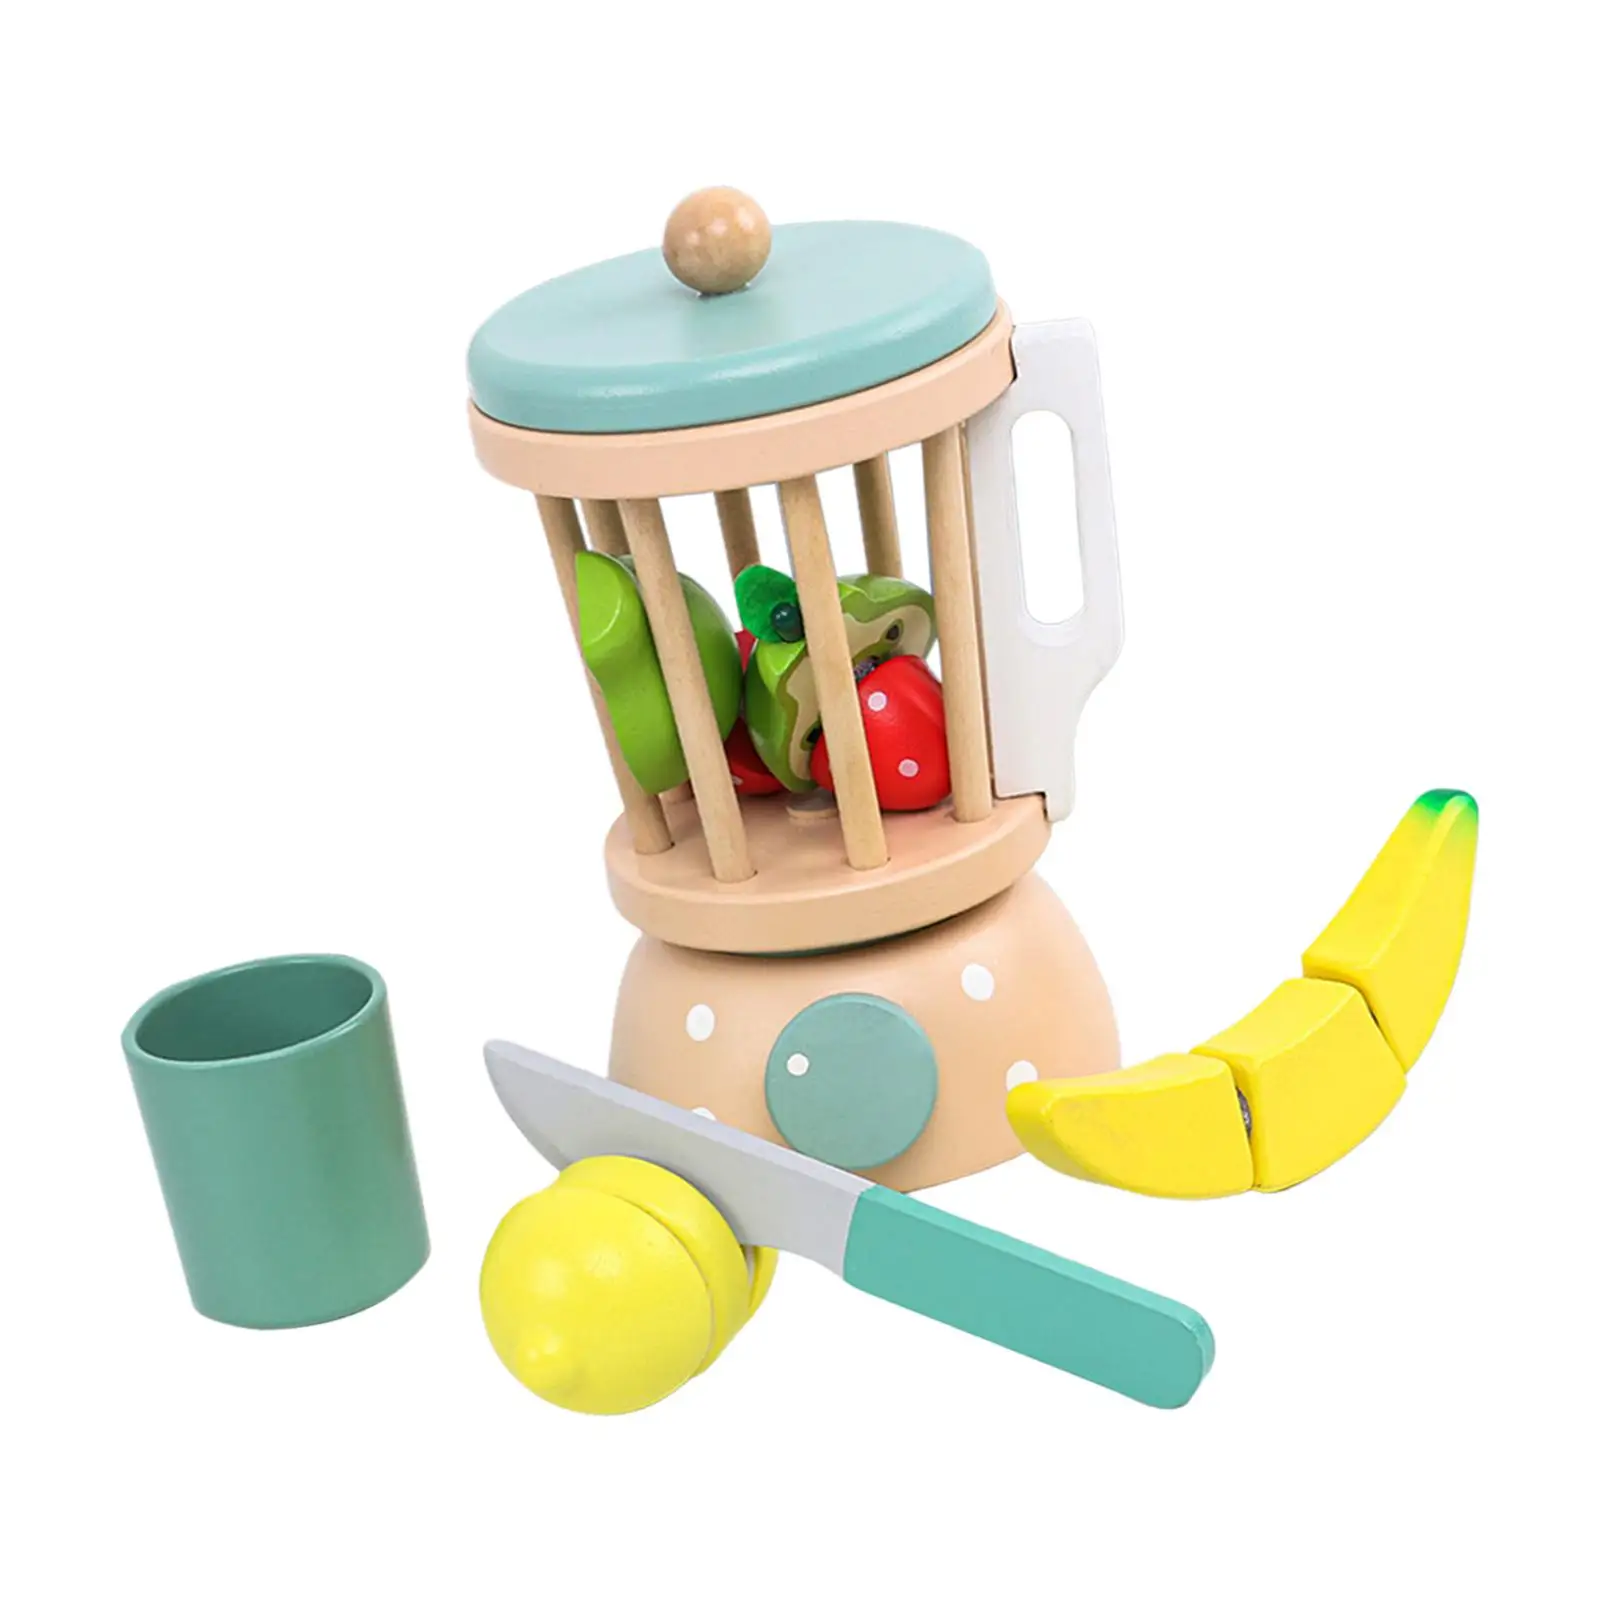 Simulated Pretend Play color Perception Interactive Wooden Smoothie Set for Preschool Age